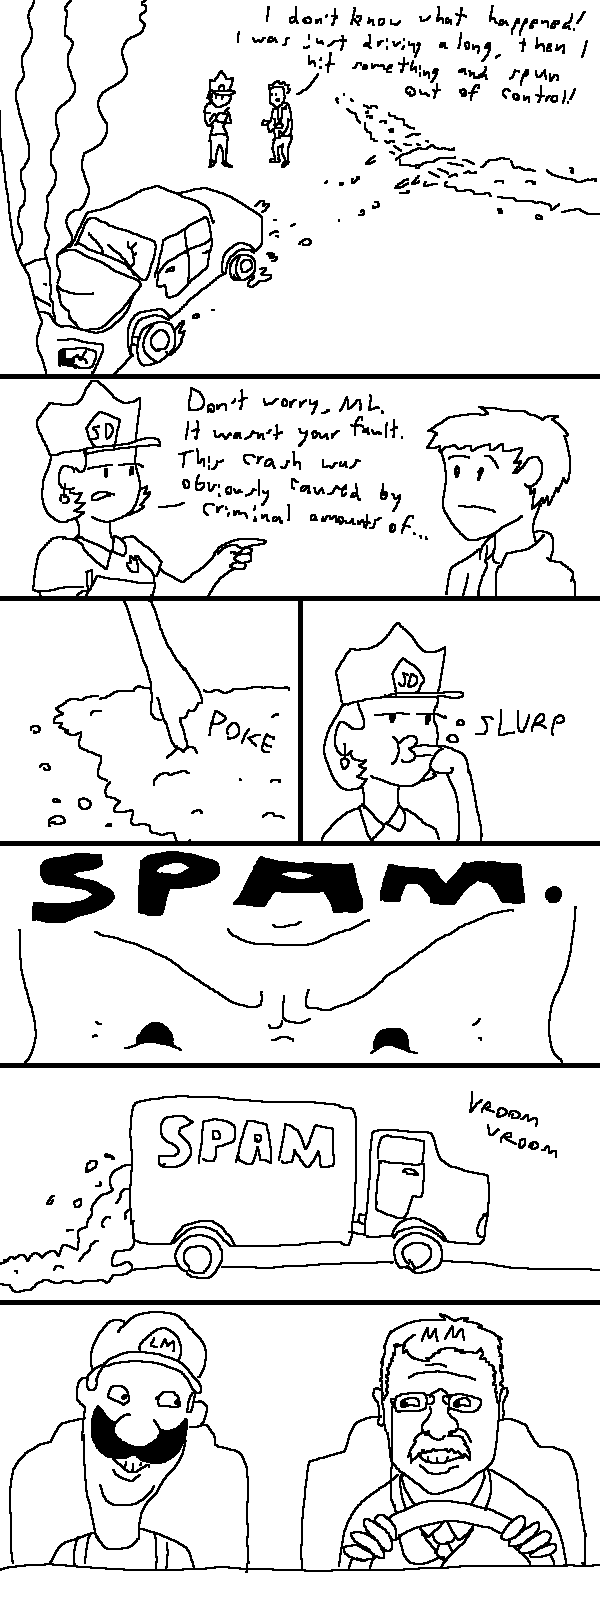 The Spam Truck